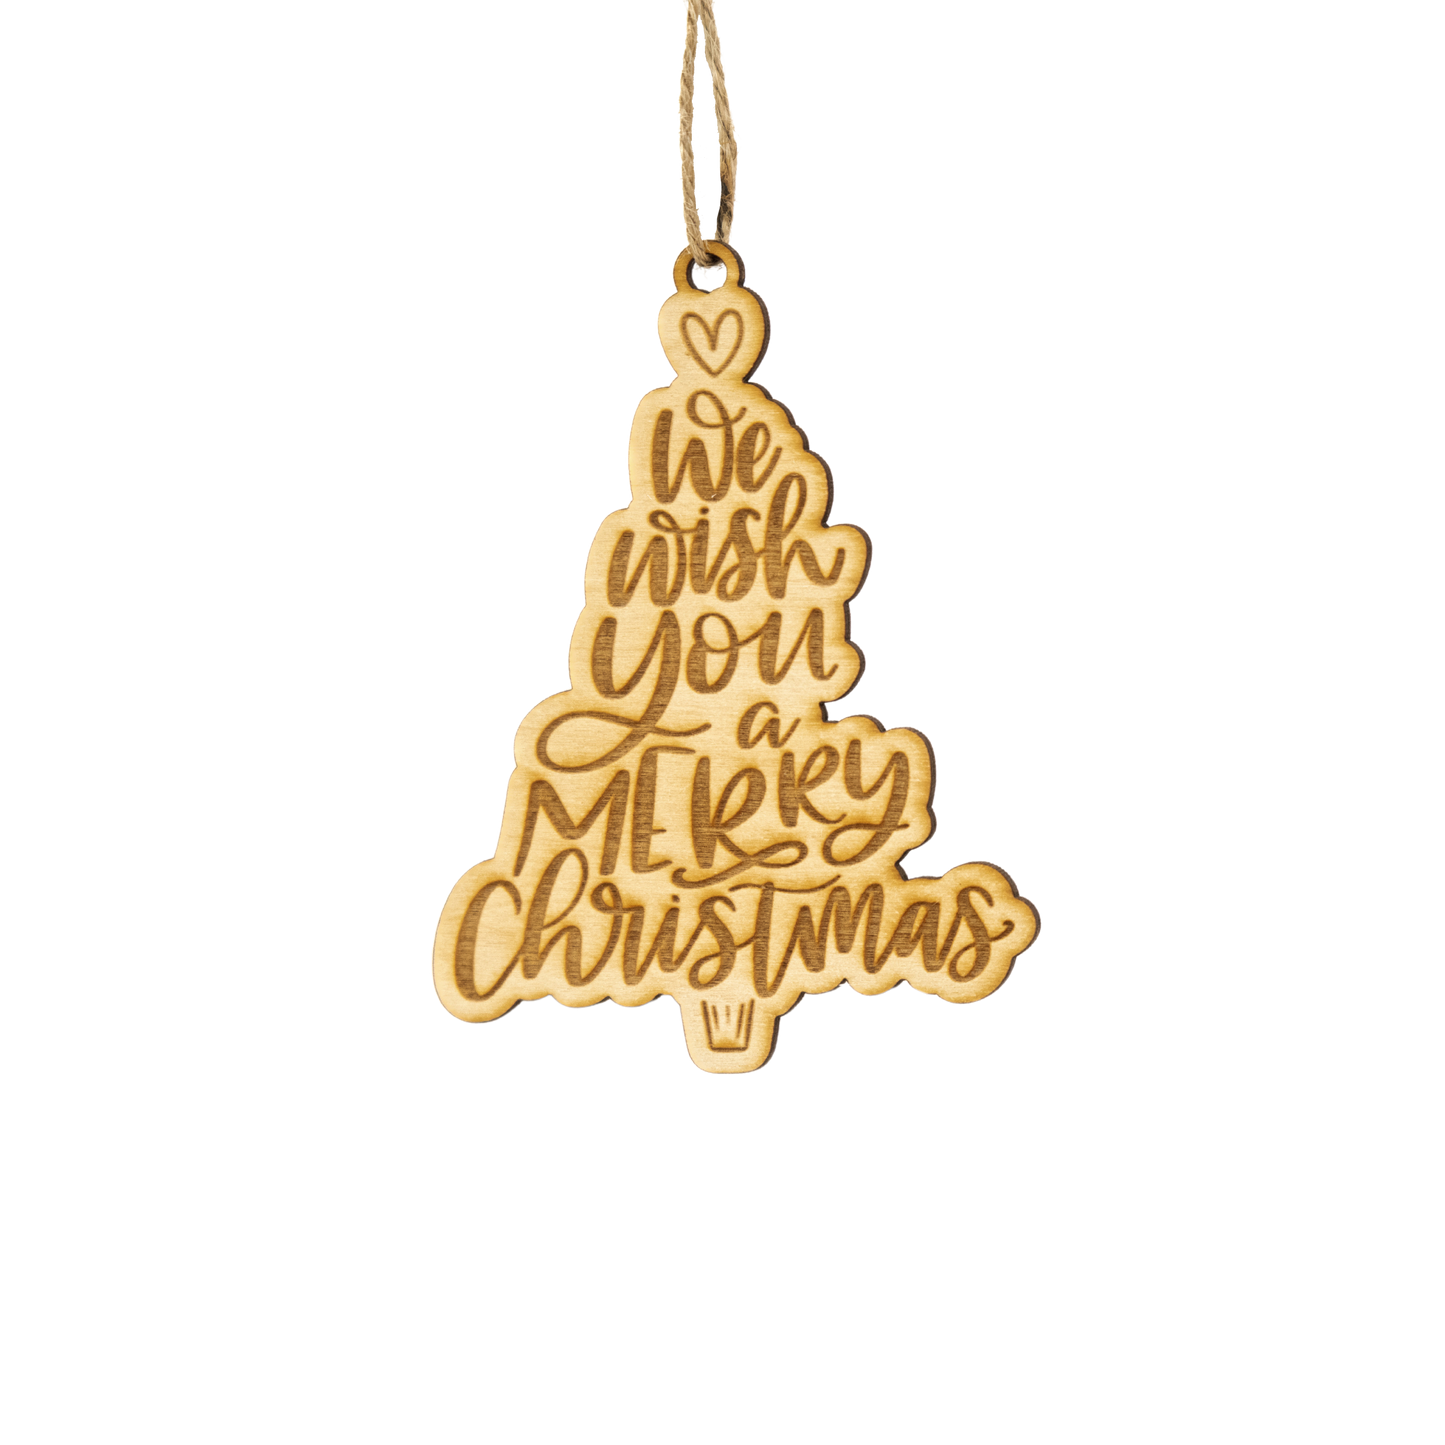 We Wish You A Merry Christmas Classic Christmas Ornament